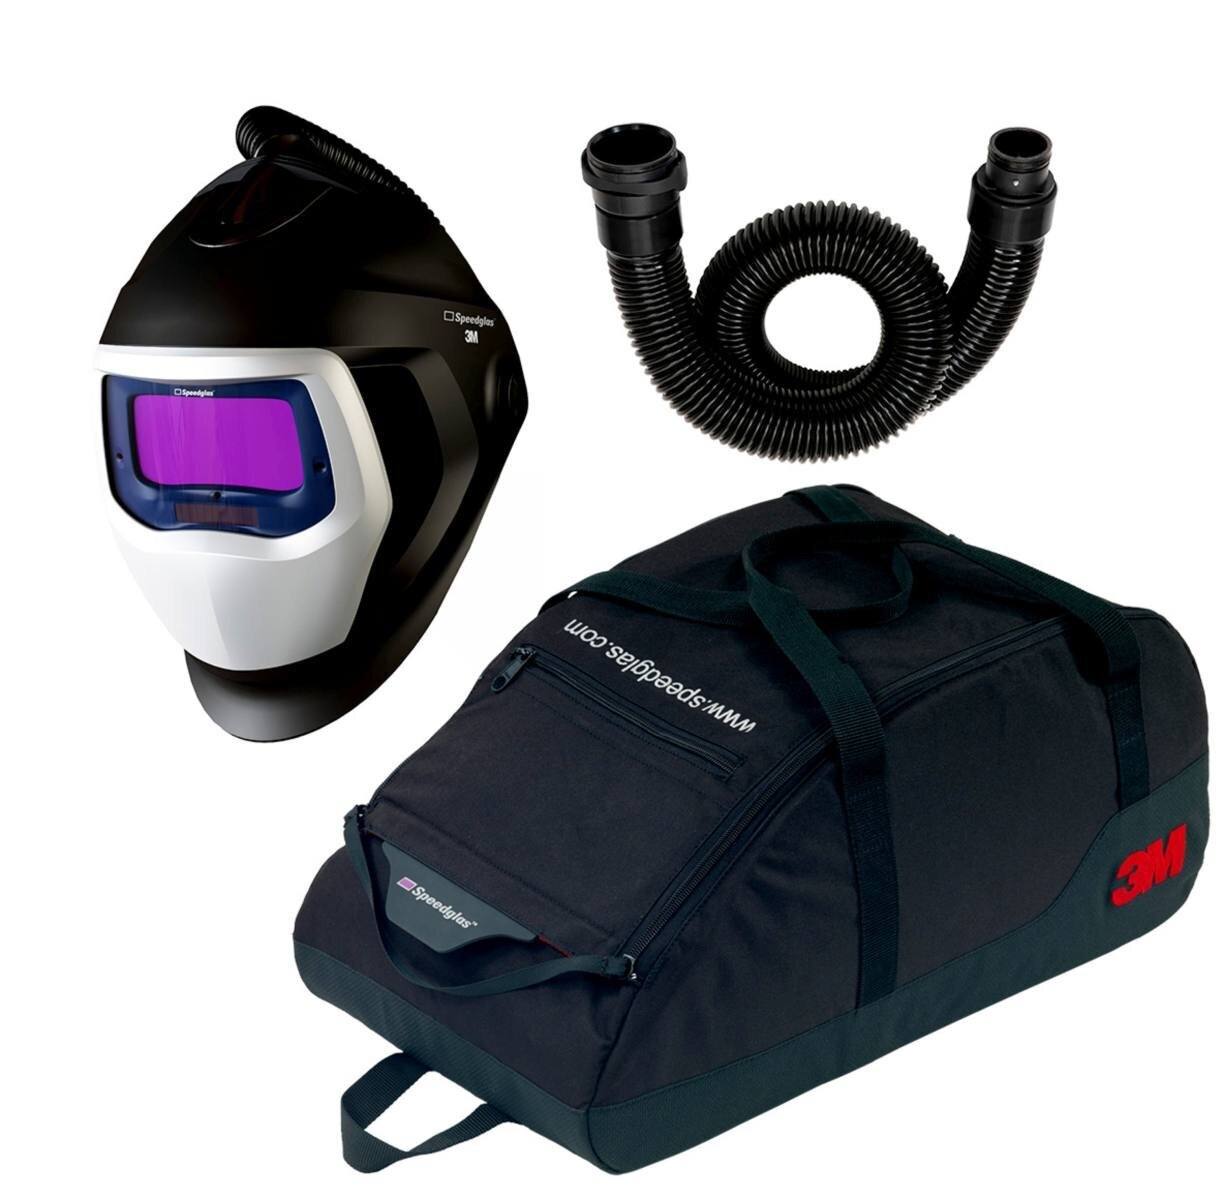 3M Speedglas 9100 Air welding mask with 9100V ADF, incl. air hose, incl. storage bag 79 01 01 - TH2 upgrade kit #569005